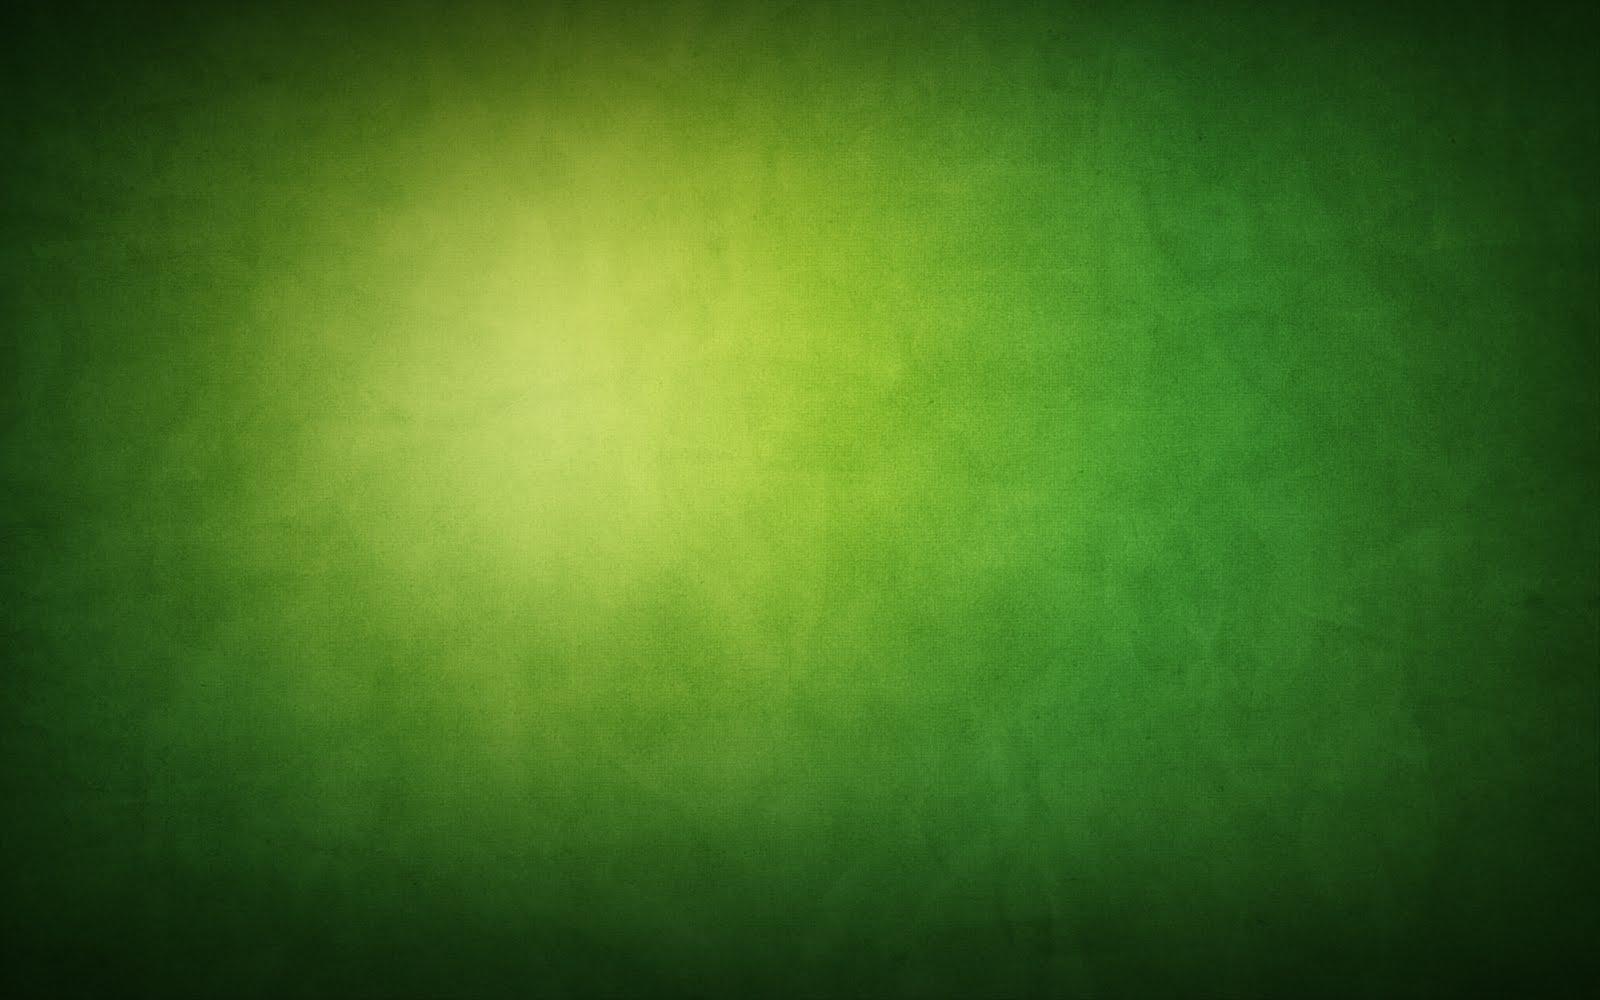 Texture Wallpaper Full HD Wallpaper Search. High Definition image